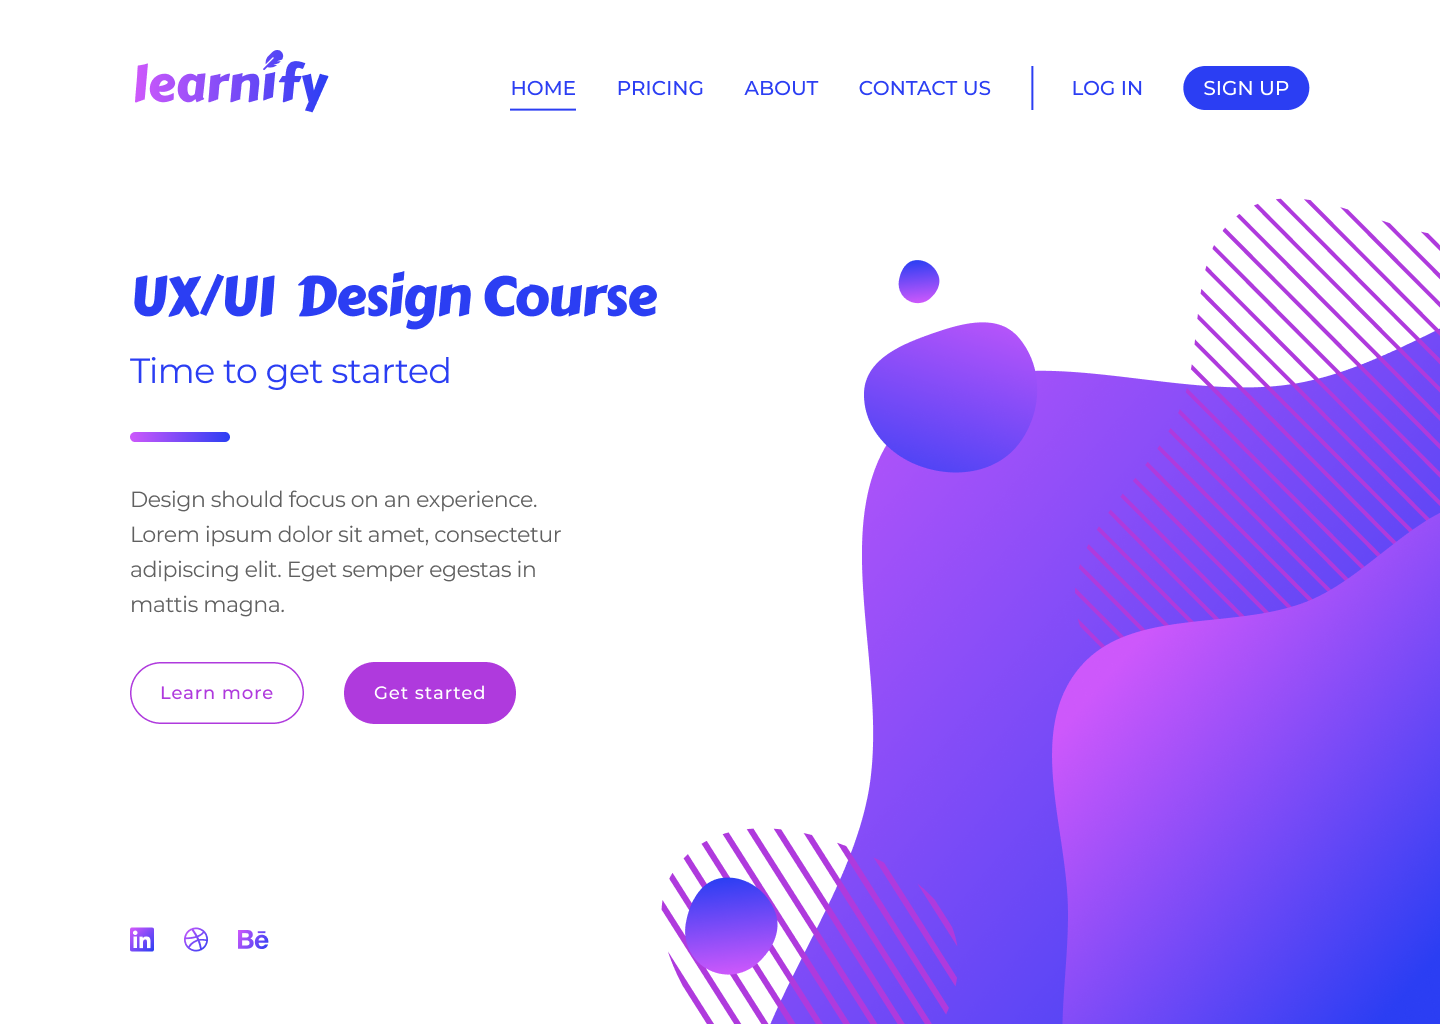 A website page for a fictional company called 'Learnify' that successfully demonstrates all of the design principles in this post.